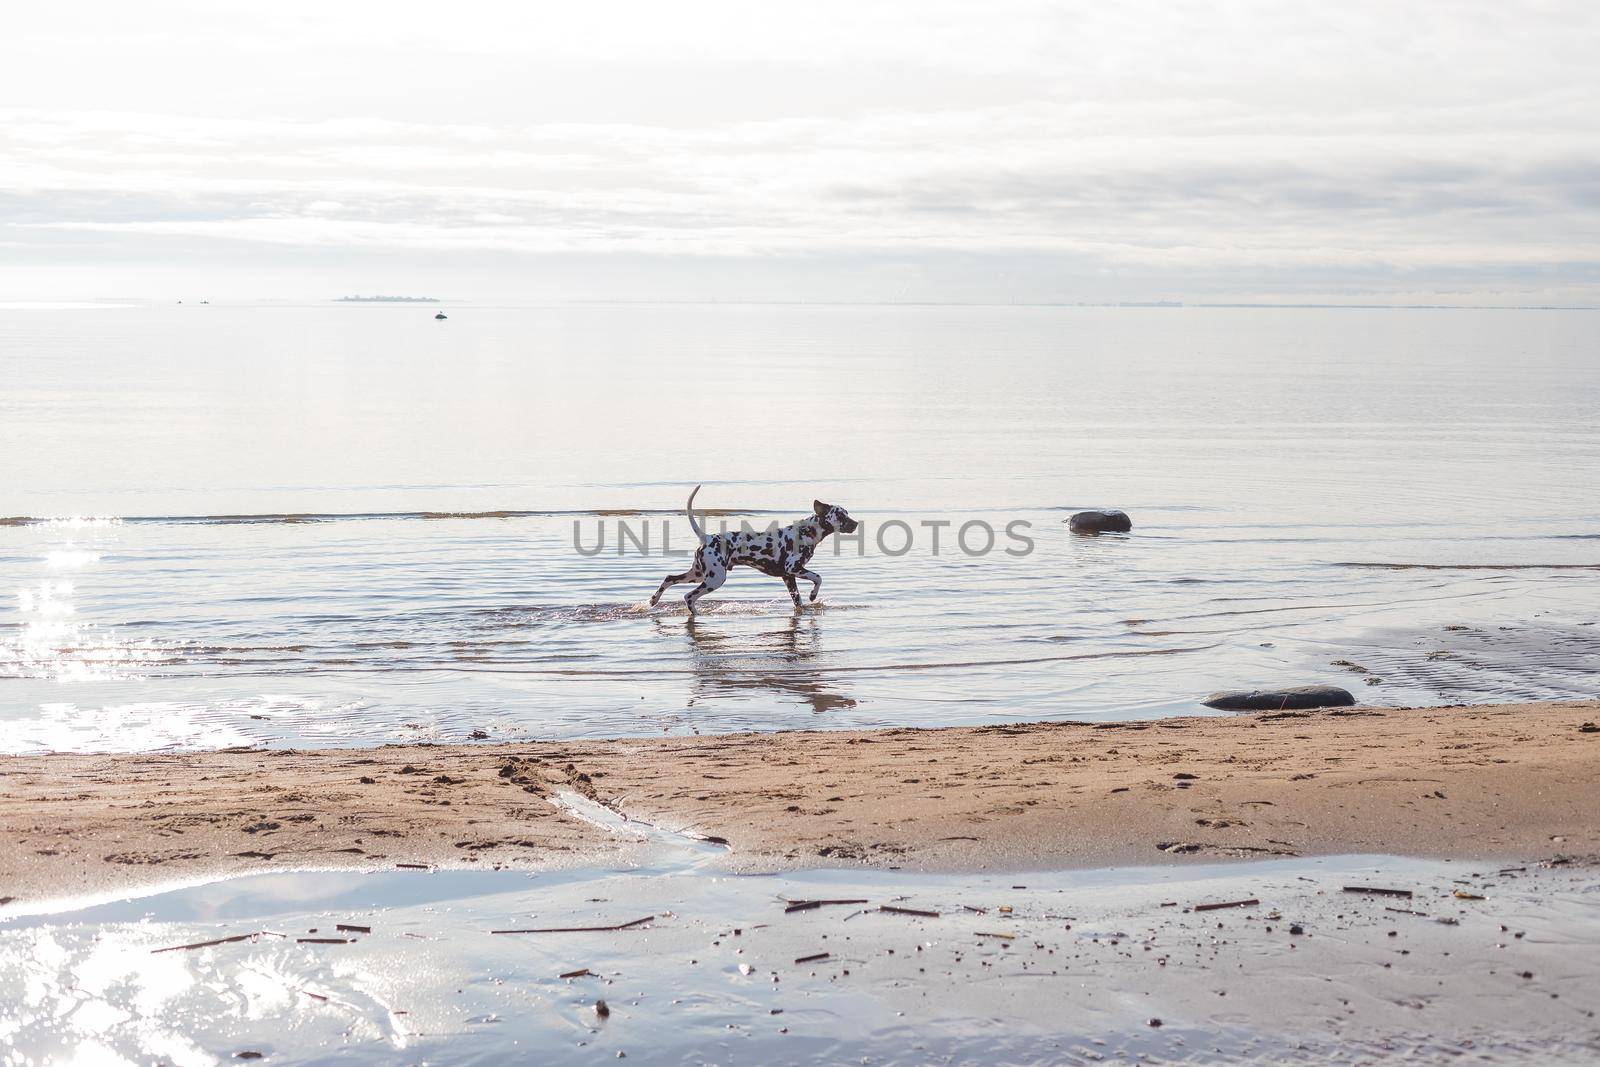 The Dalmatian is a breed of large-sized dog running on beach ,water splashes. Sunny daytime, river, lake.